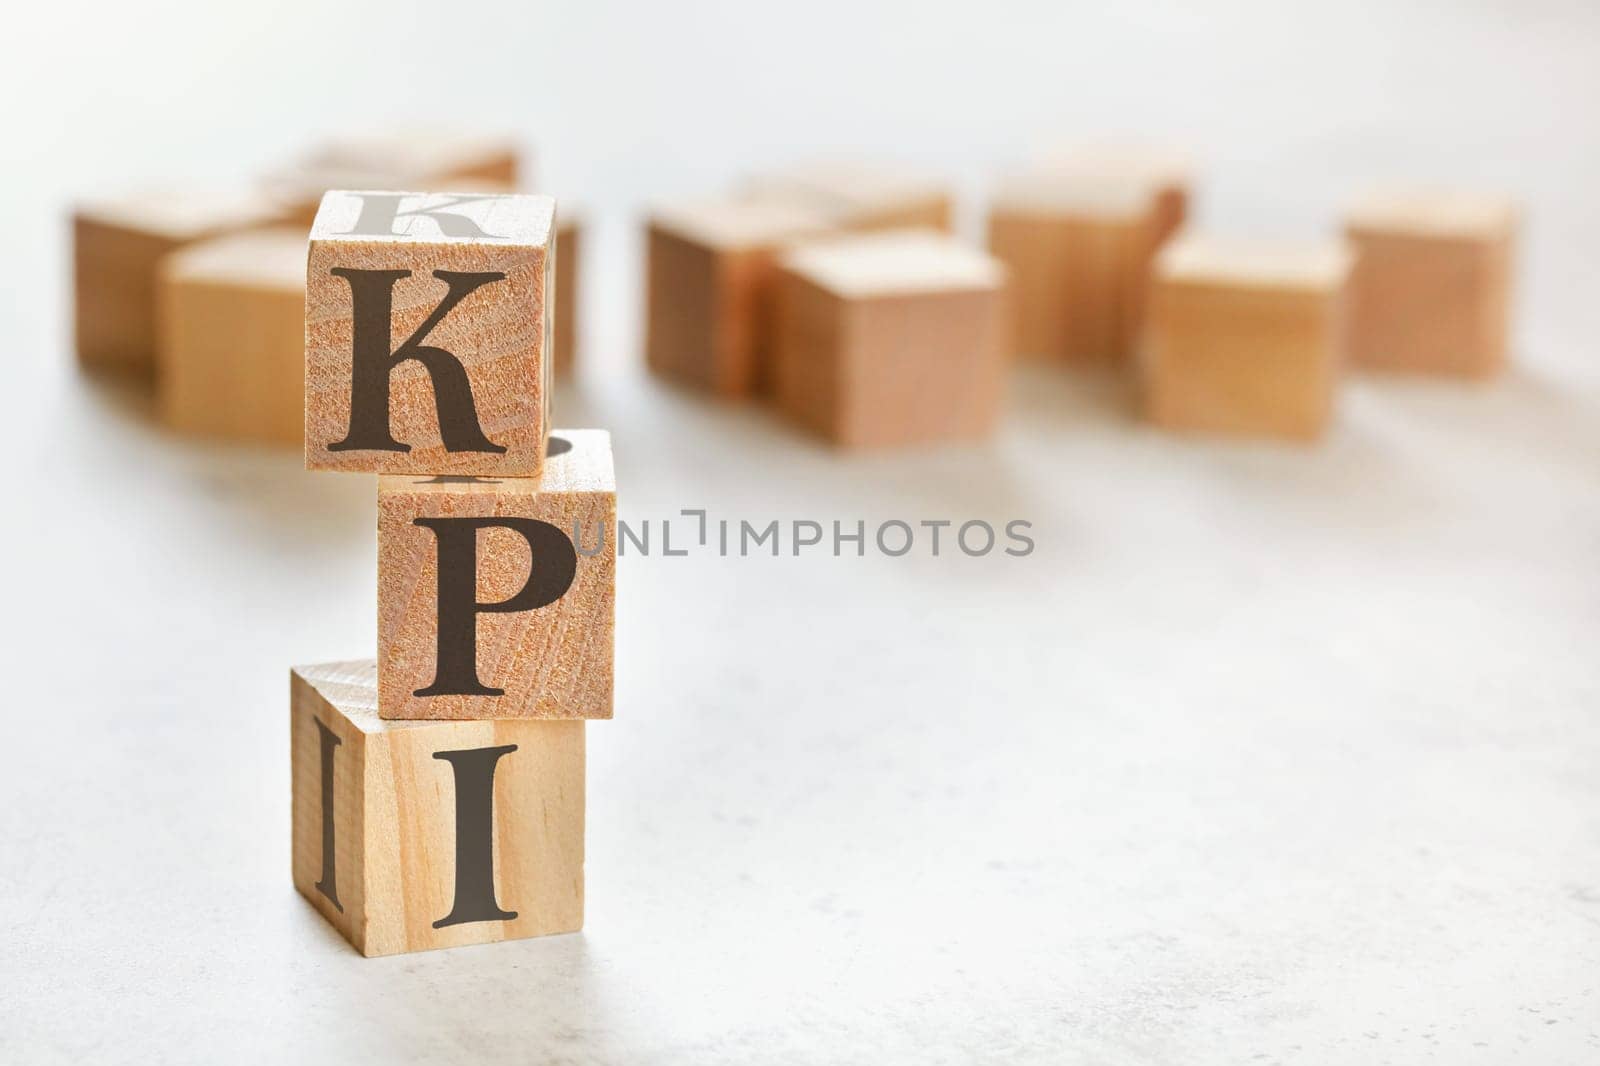 Three wooden cubes with letters KPI (means Key Performance Indicator), on white table, more in background, space for text in right down corner by Ivanko